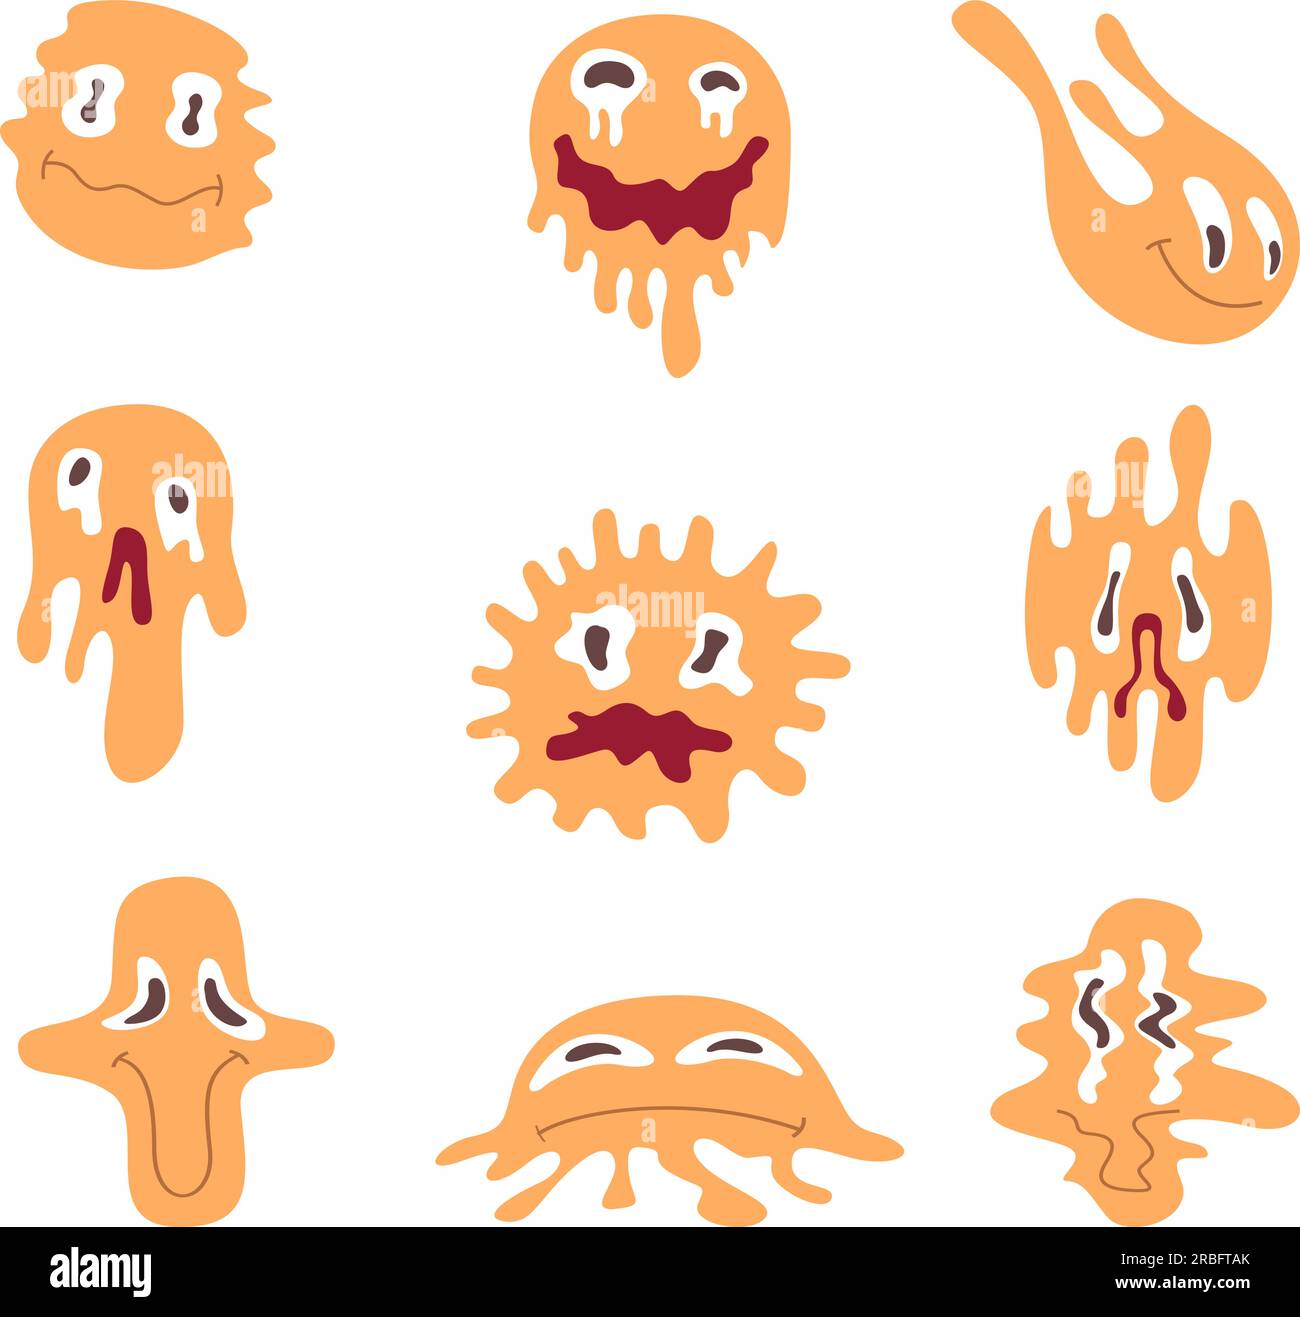 Distorted smiles. Funny emoticons falling and liquid exact vector abstract emojis in cartoon style Stock Vector